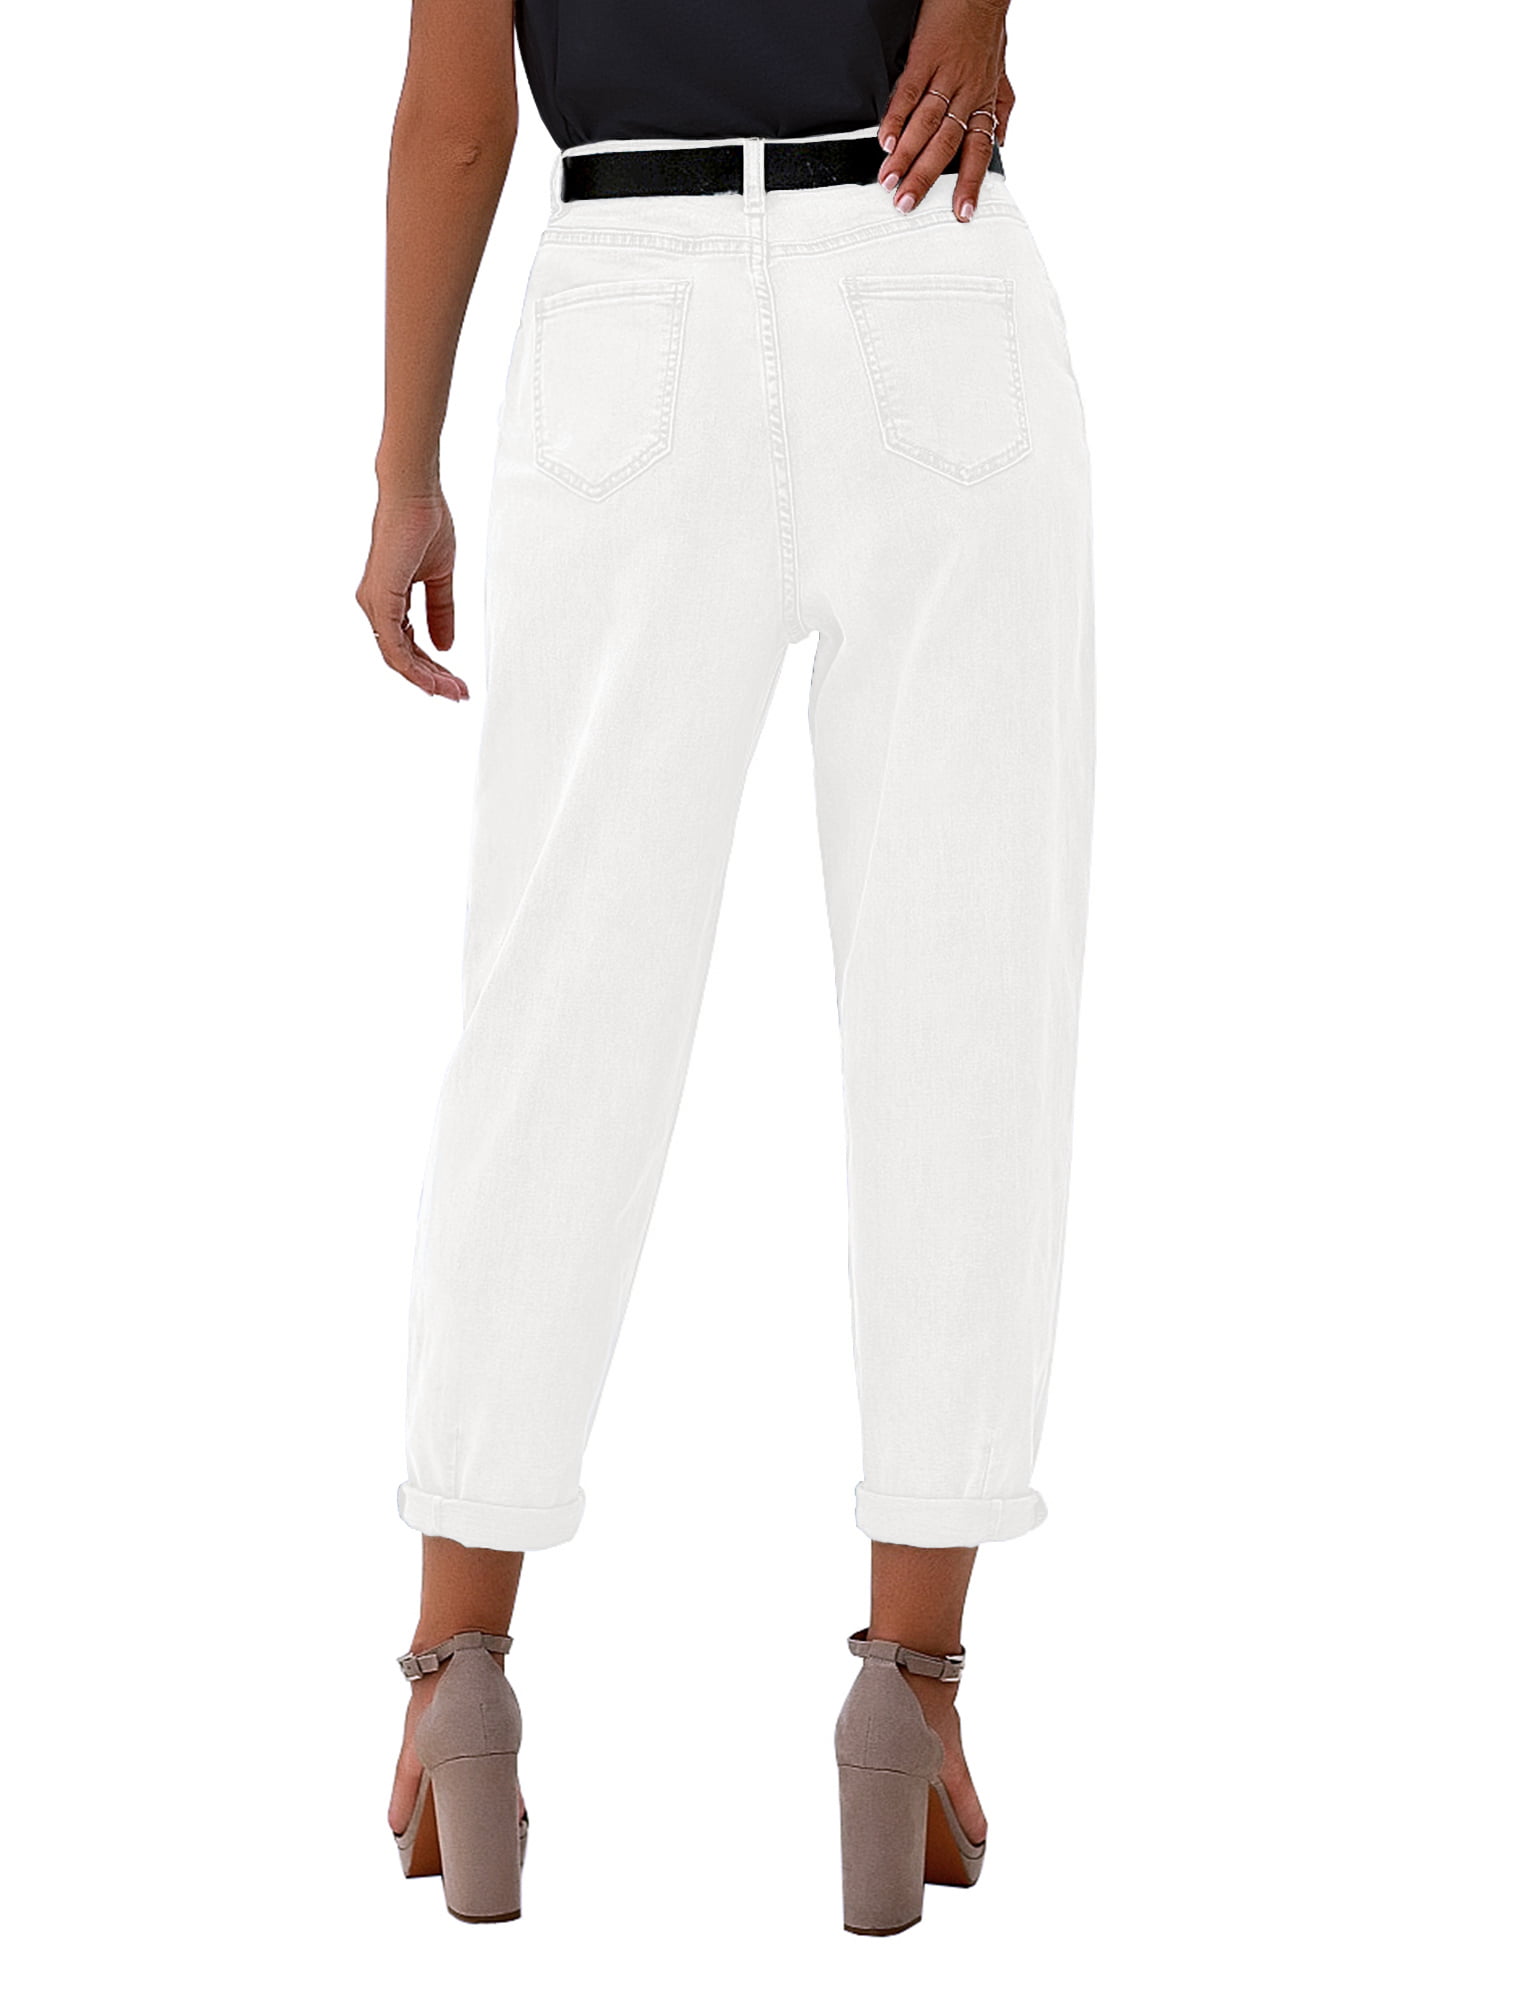 luvamia Classic High Waisted Jeans for Women Fit Tapered Jeans Boyfriend Pants White Size S Size 4 Size - Walmart.com